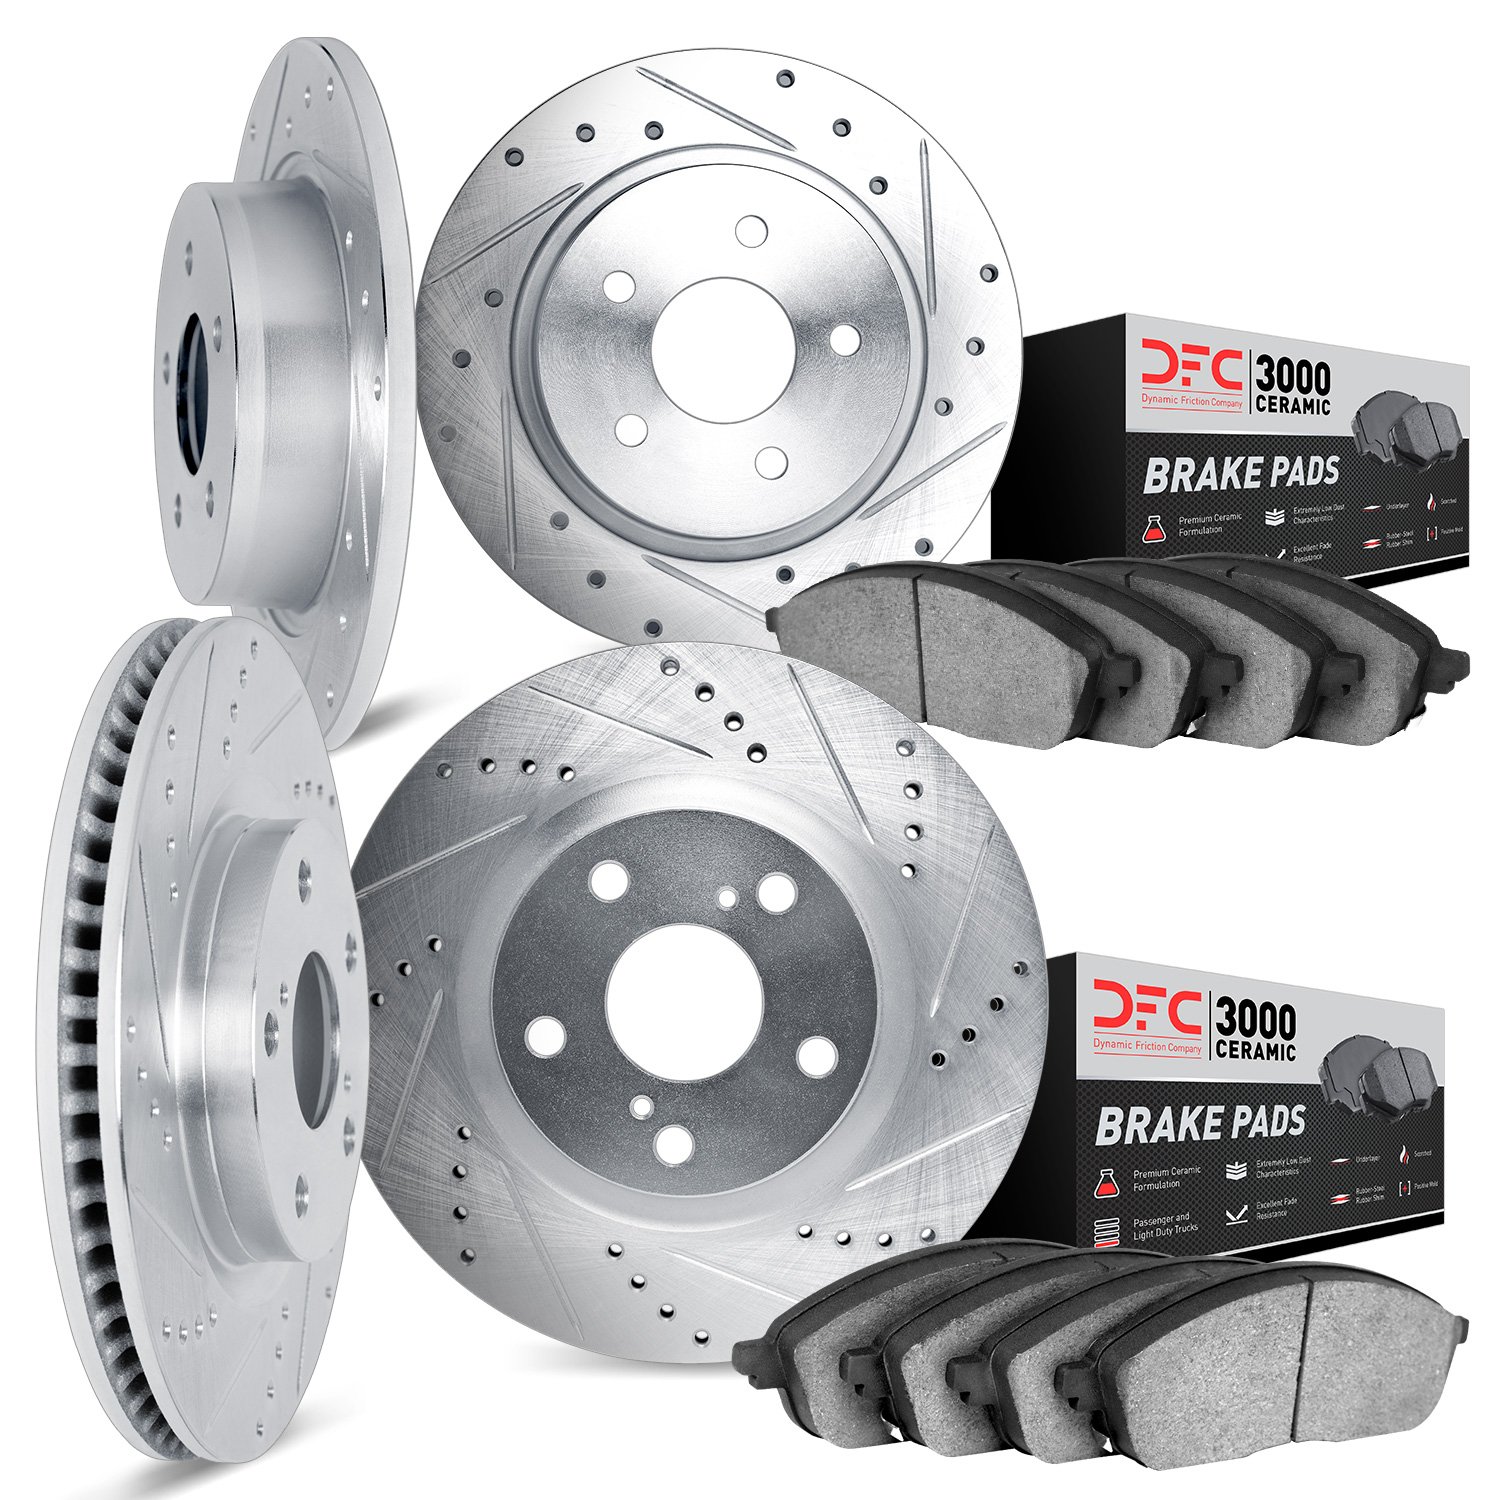 7304-54102 Drilled/Slotted Brake Rotor with 3000-Series Ceramic Brake Pads Kit [Silver], 2013-2020 Ford/Lincoln/Mercury/Mazda, P